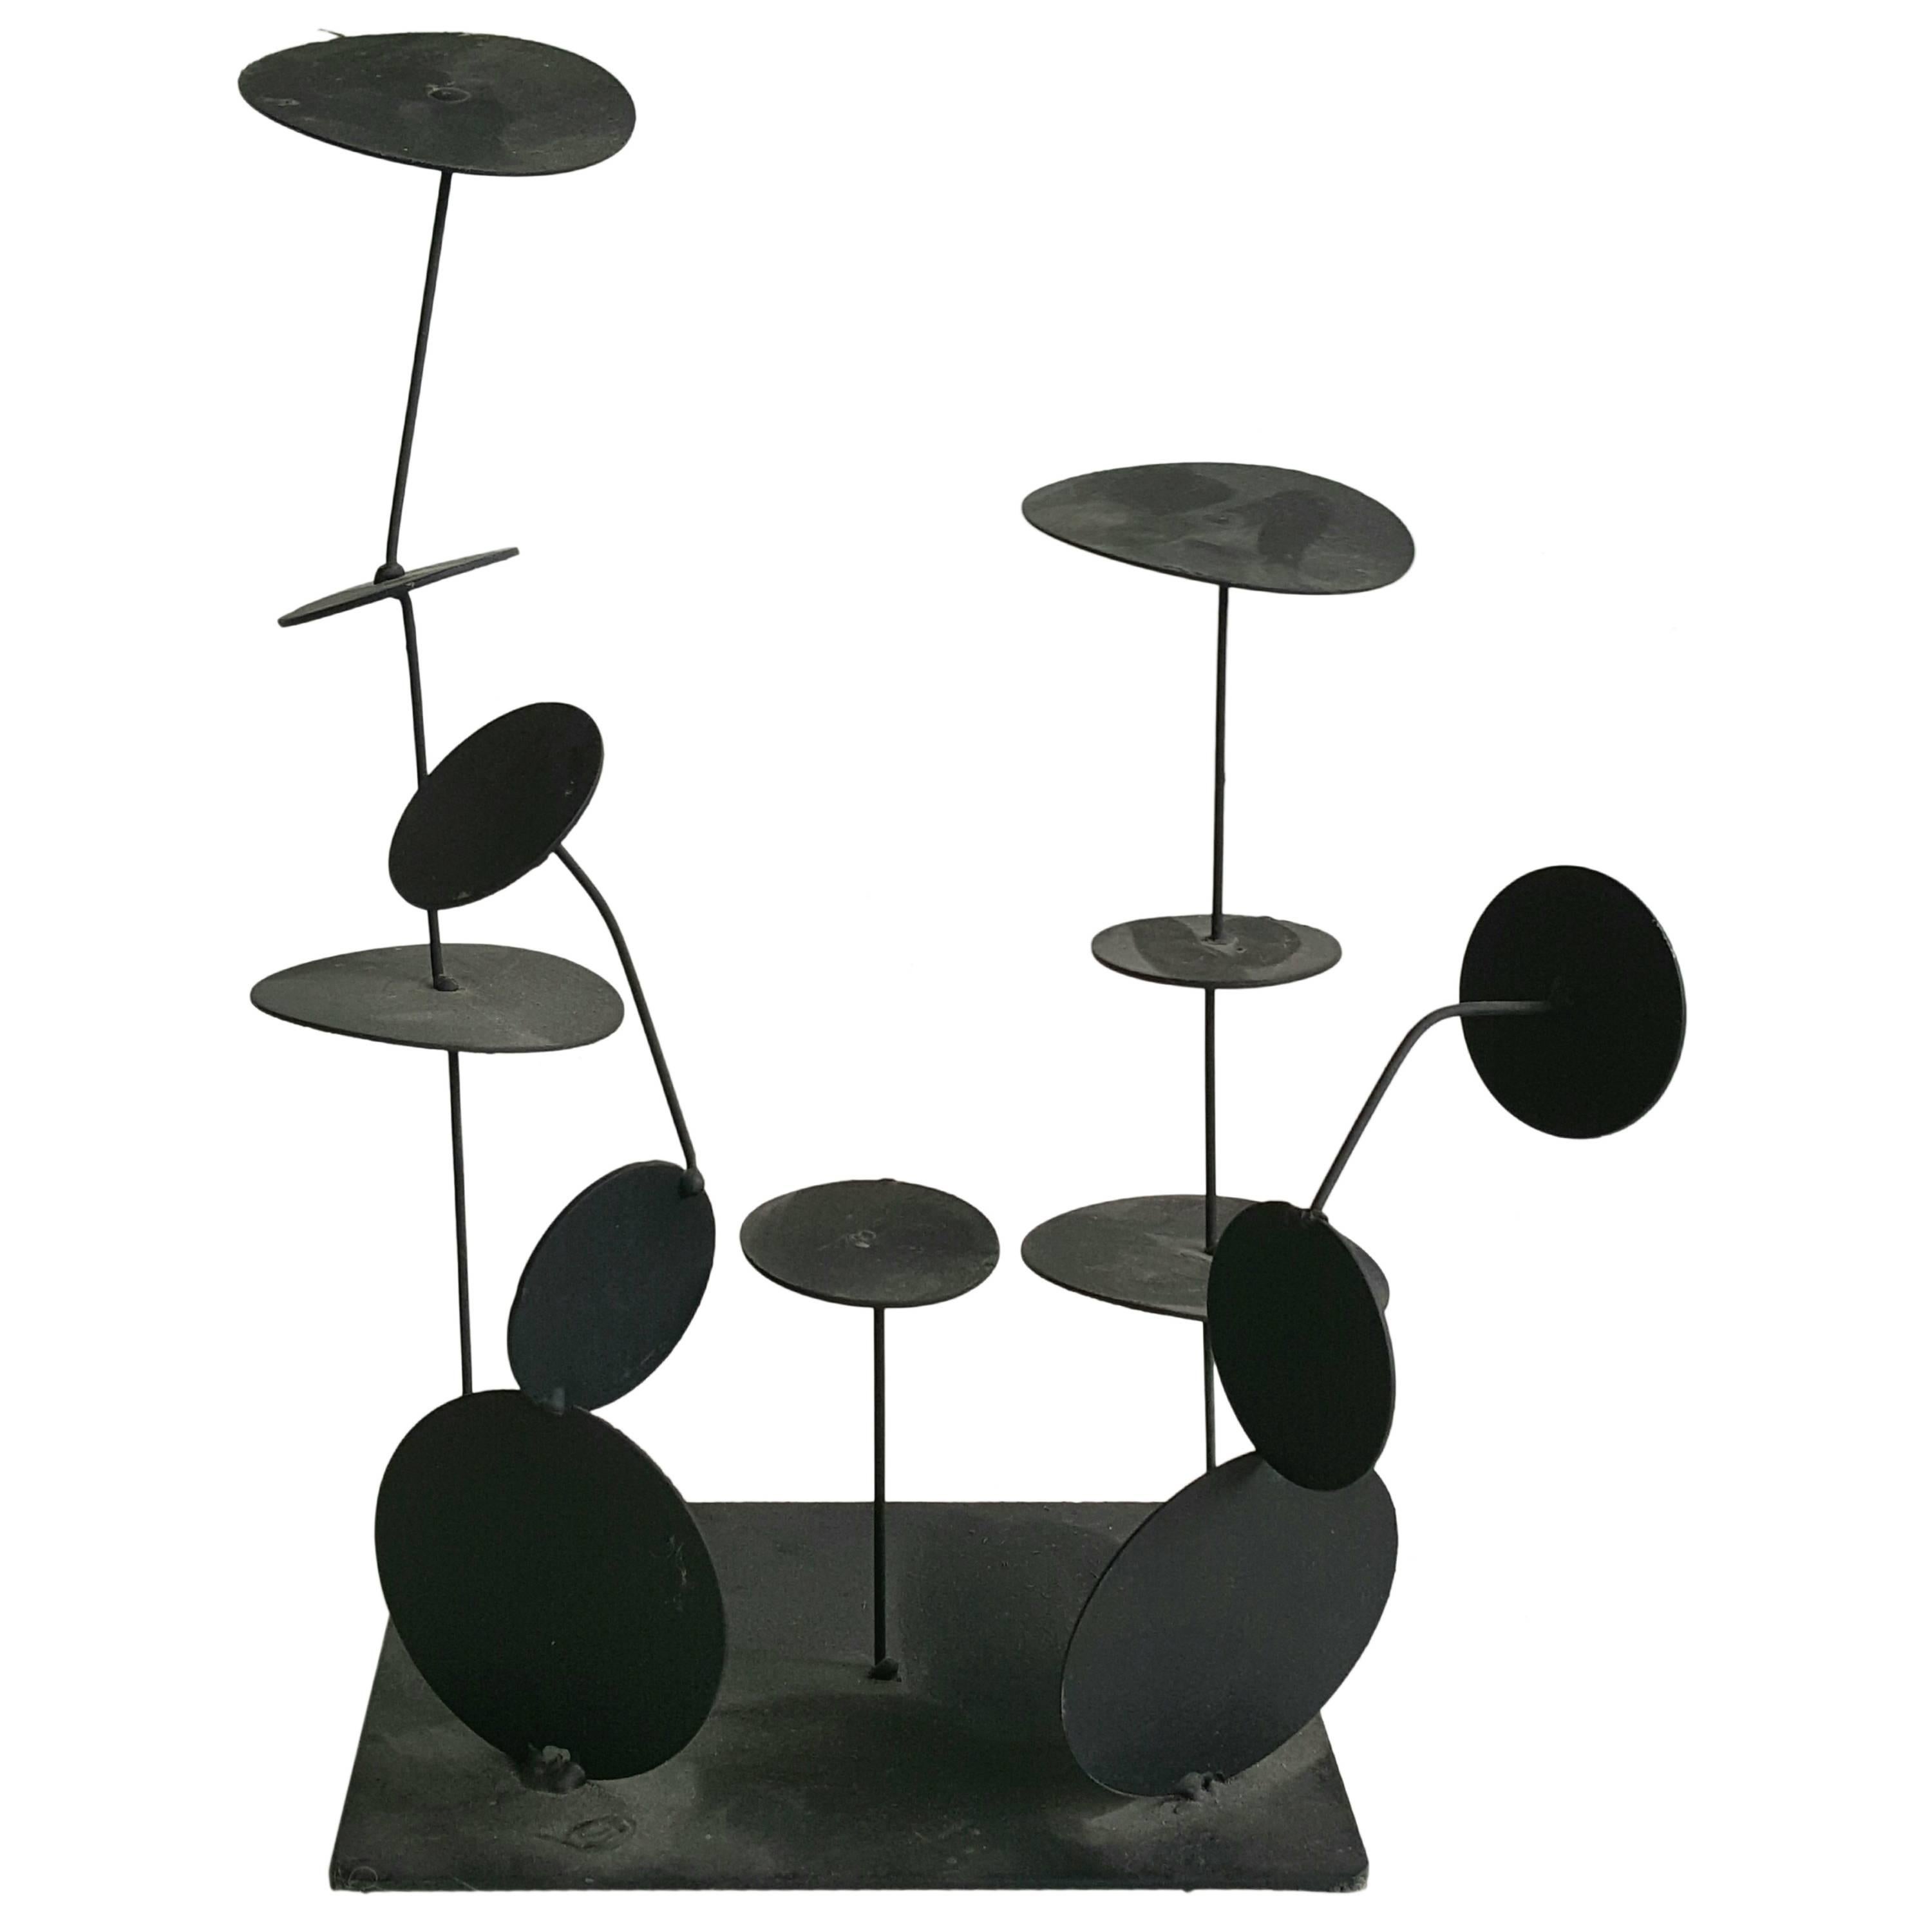 Modernist Iron Abstract Kinetic Sculpture "Drum Set", Lily Pads